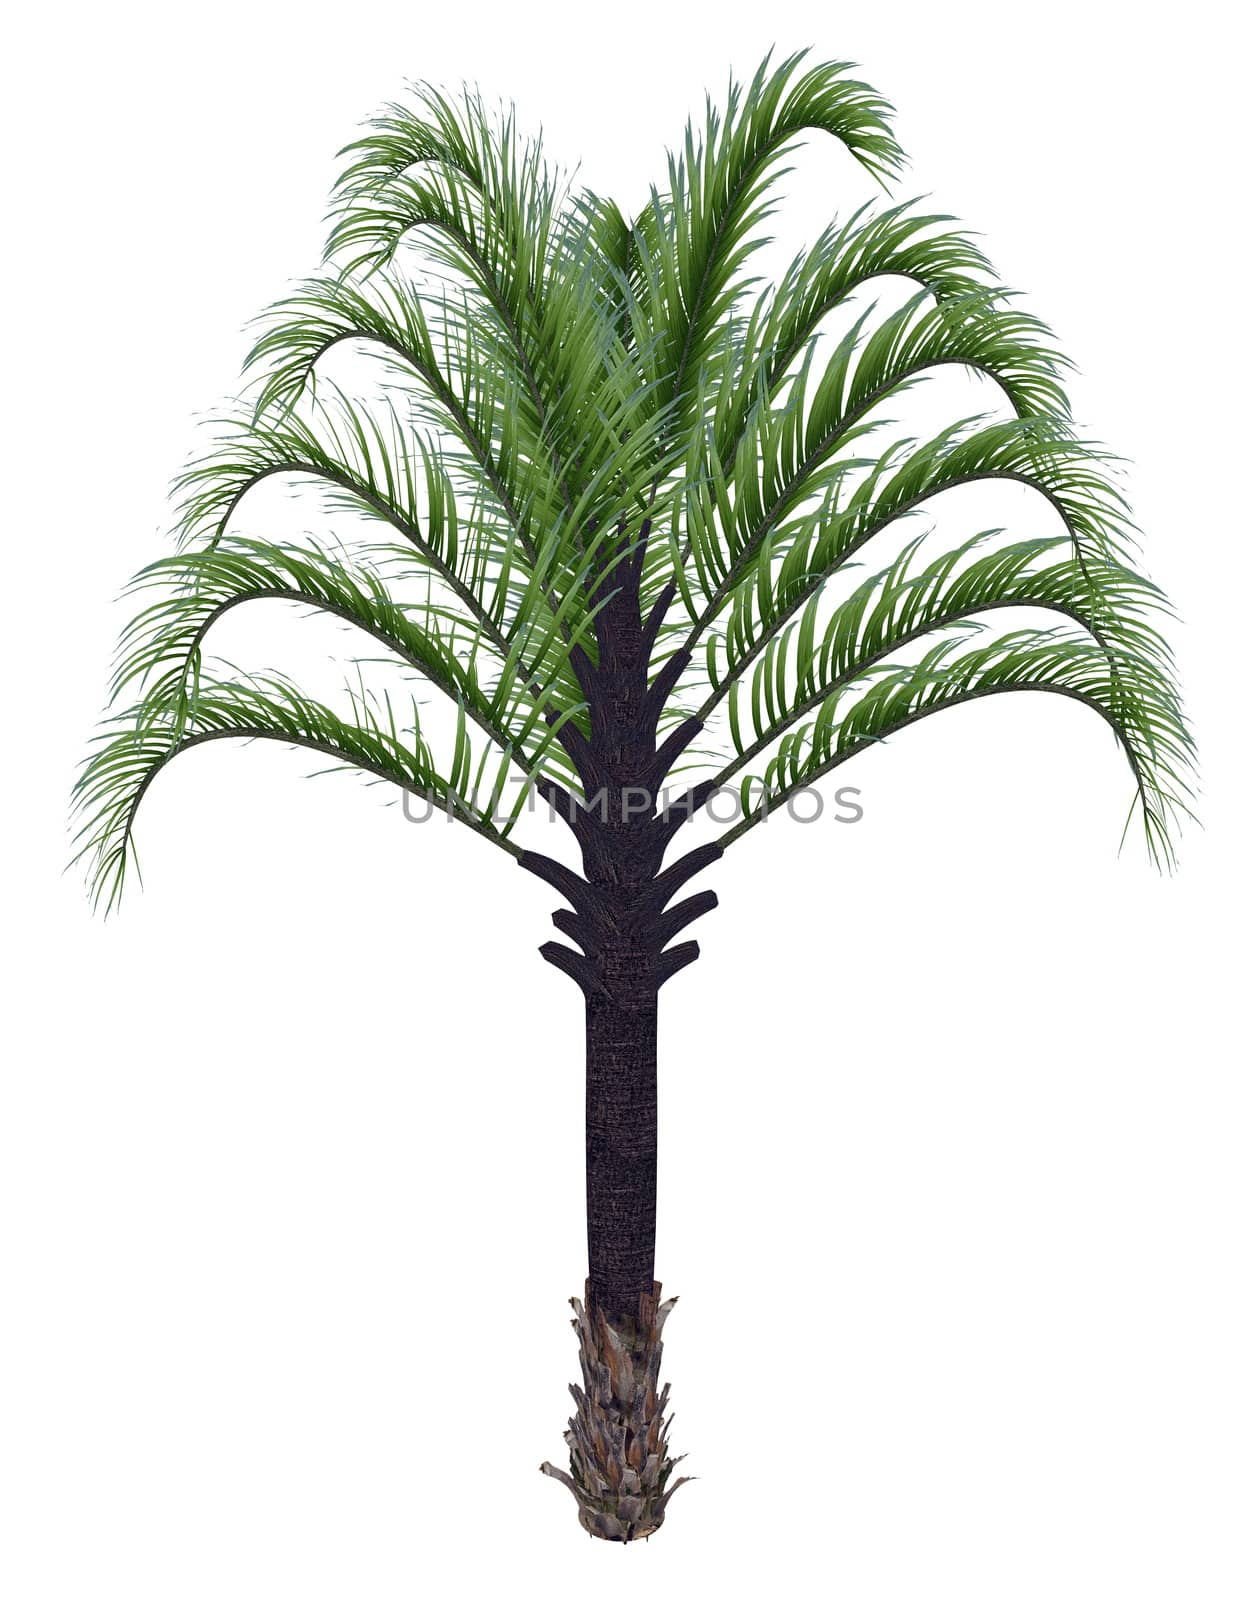 Triangle palm tree, dypsis decaryi - 3D render by Elenaphotos21